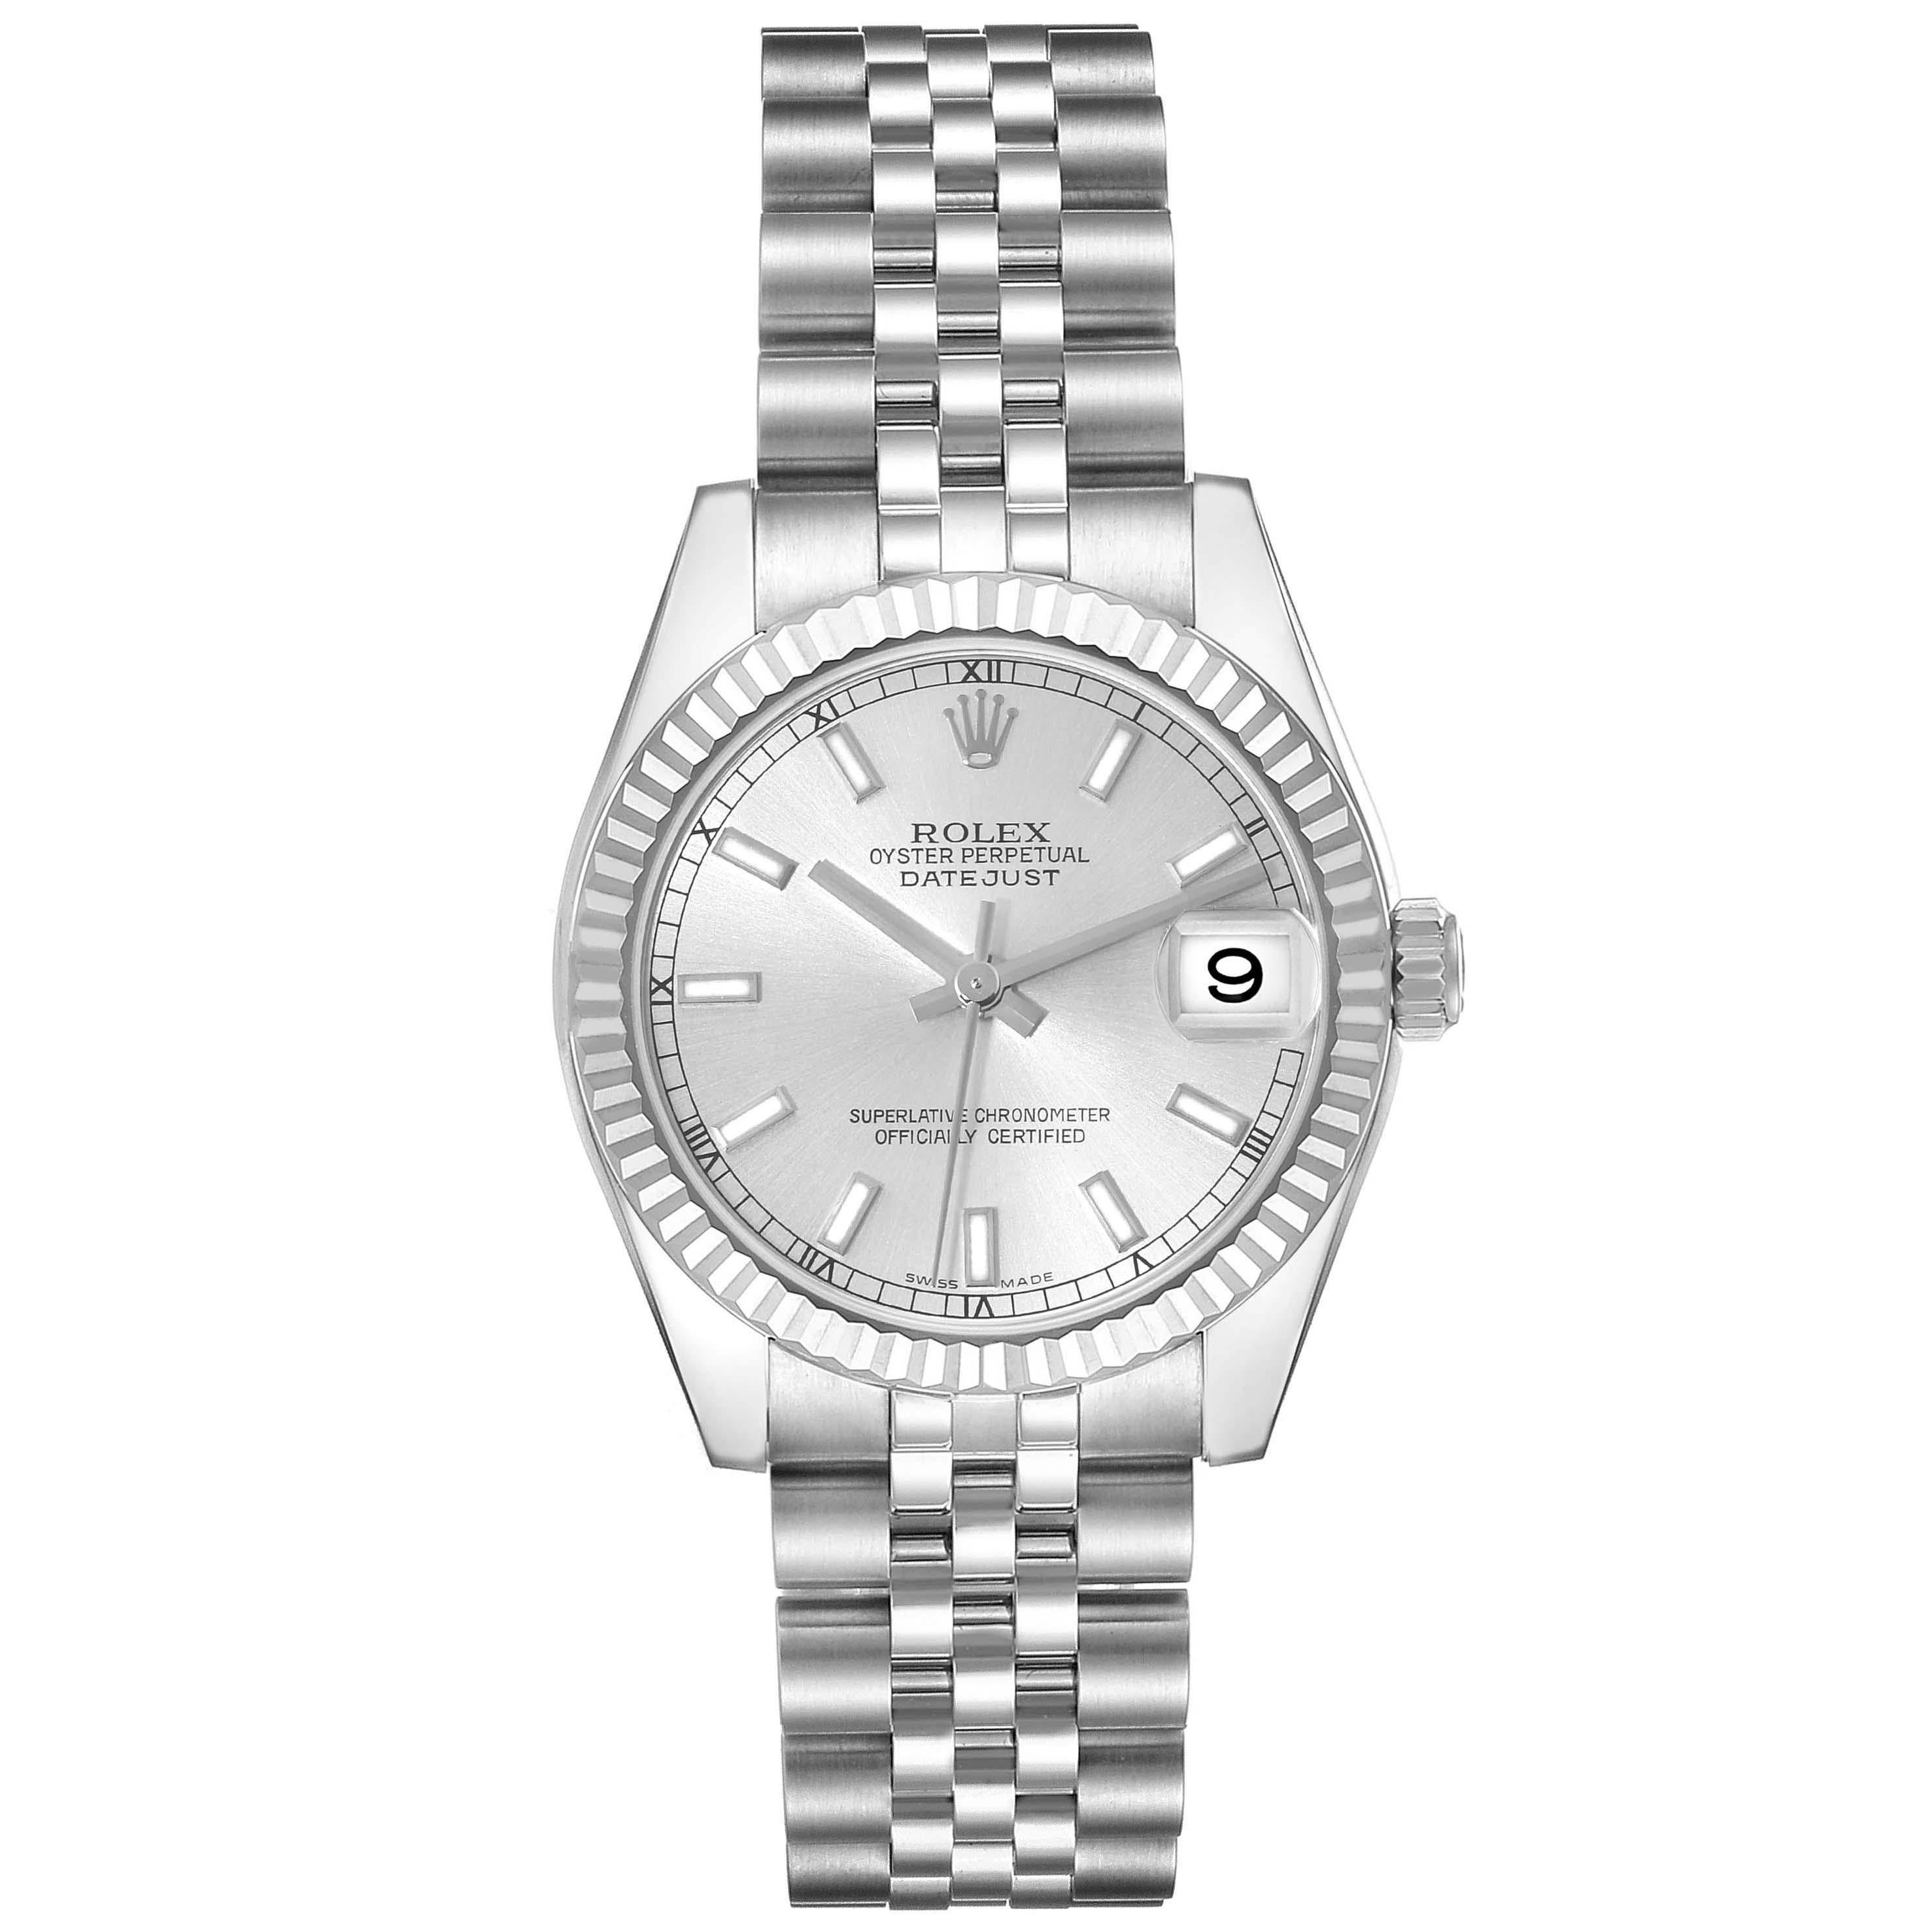 Rolex Datejust Midsize 31 Steel White Gold Silver Dial Ladies Watch 178274. Officially certified chronometer automatic self-winding movement. Stainless steel oyster case 31.0 mm in diameter. Rolex logo on the crown. 18k white gold fluted bezel.